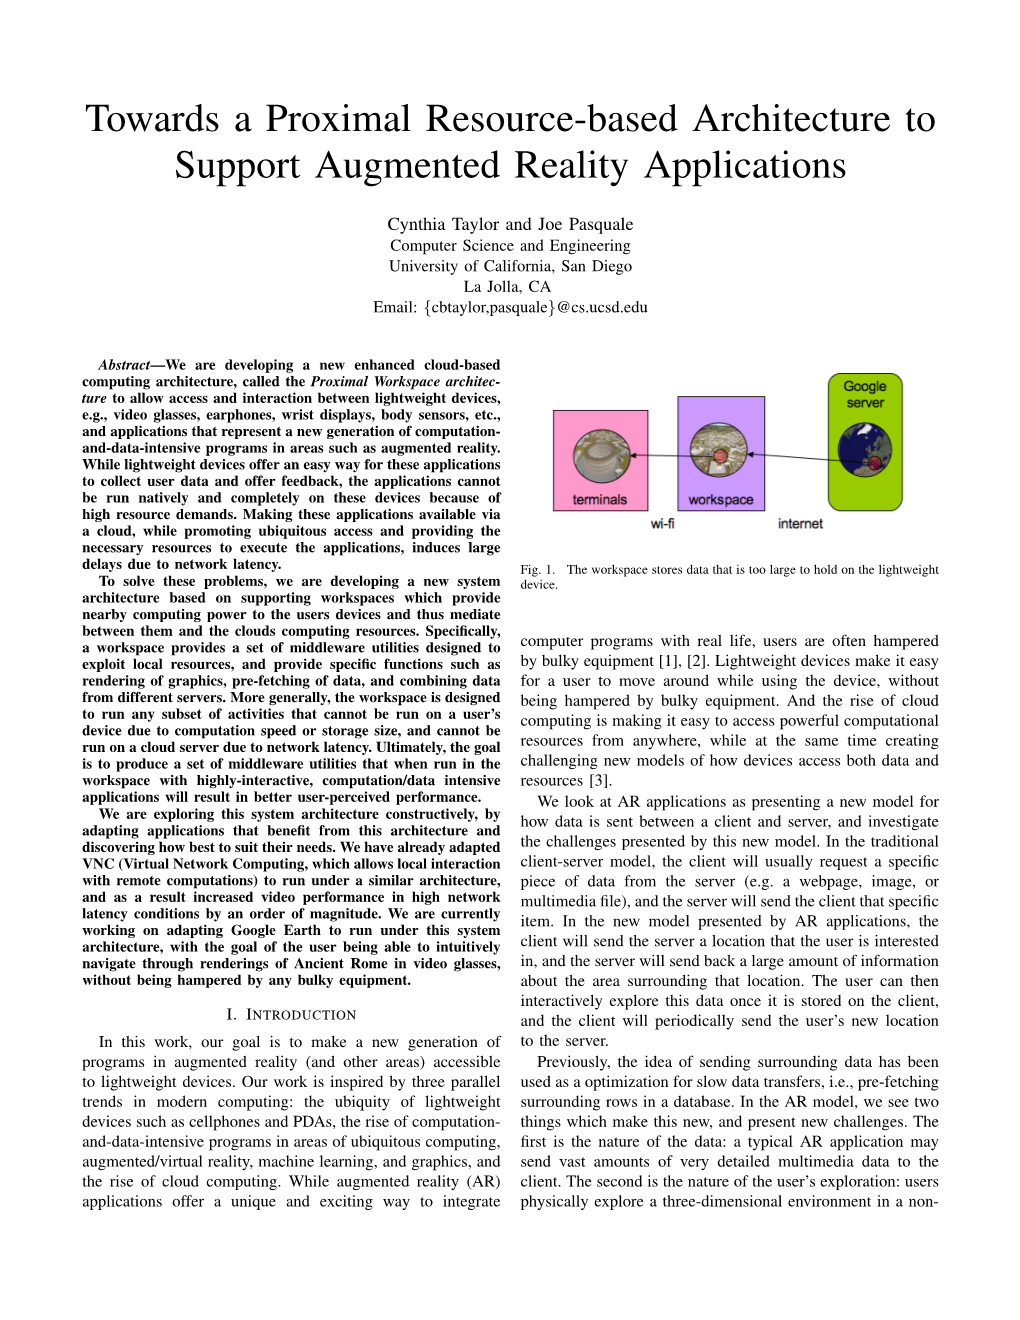 Towards a Proximal Resource-Based Architecture to Support Augmented Reality Applications